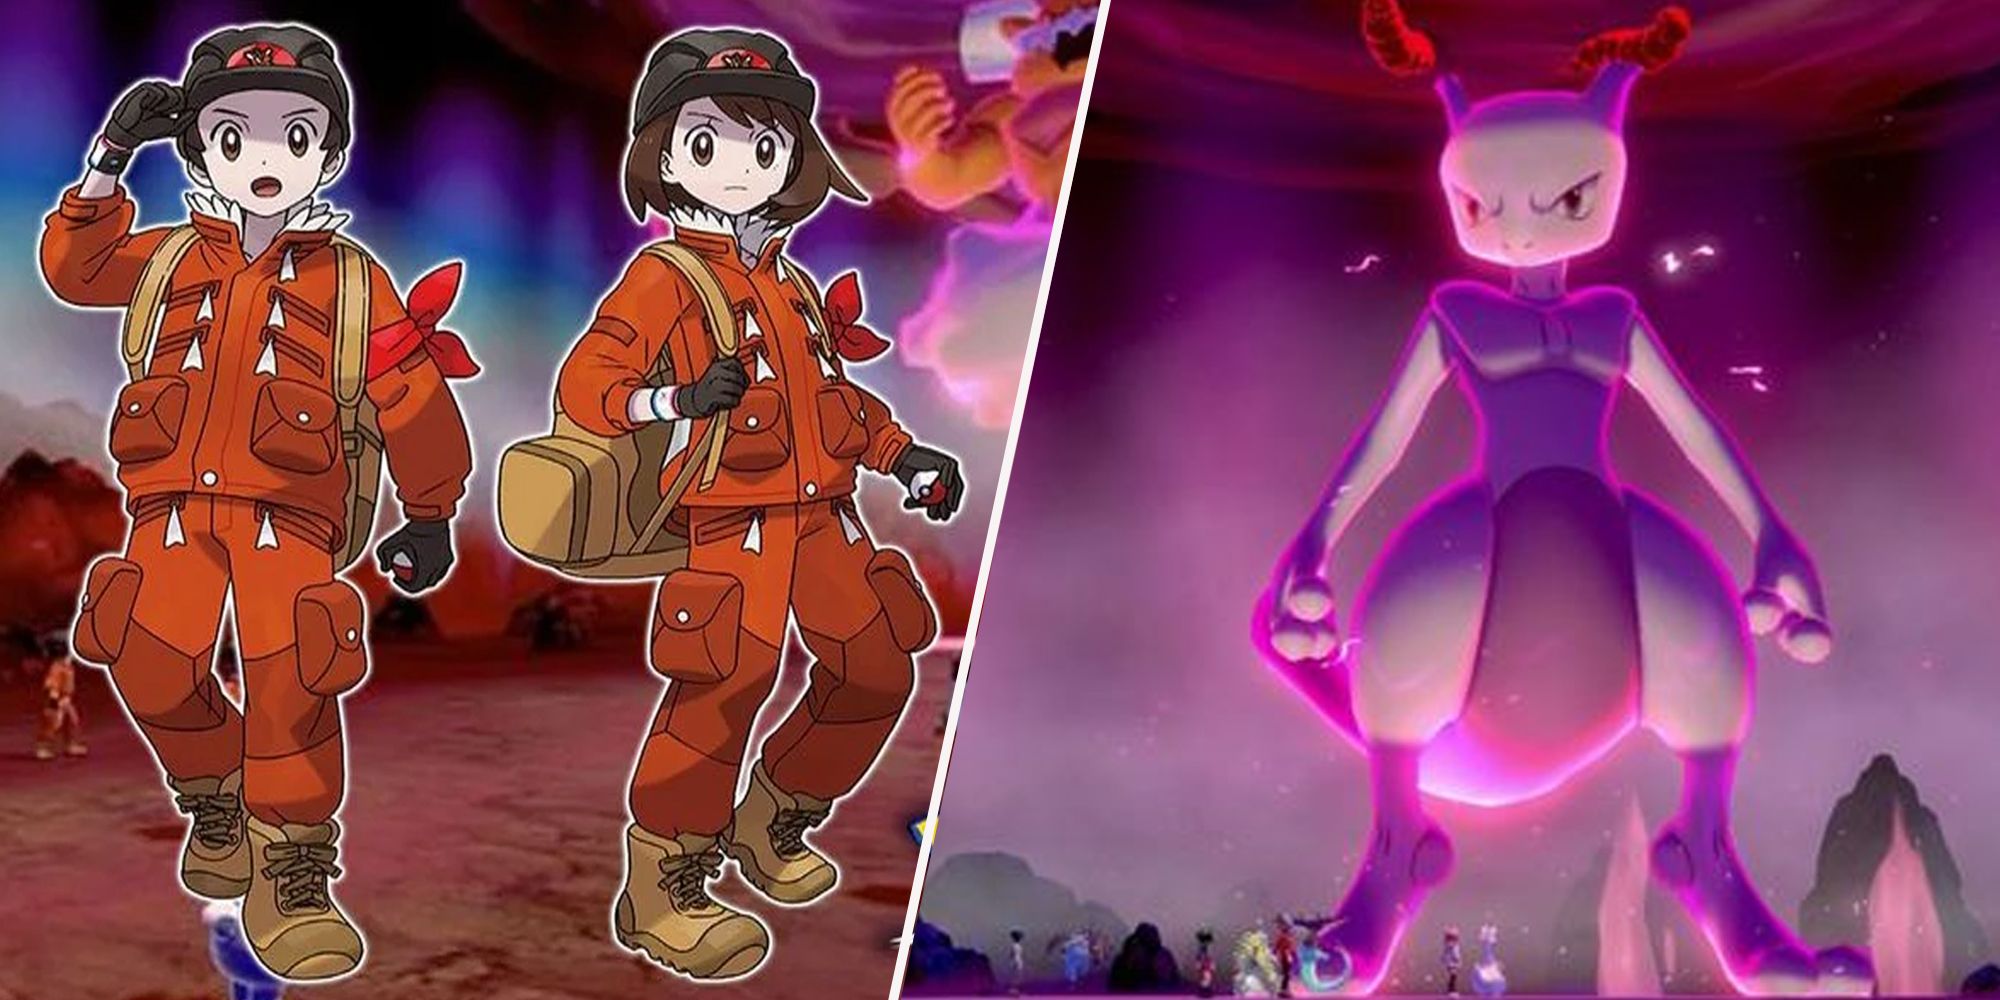 Pokémon Sword and Shield: Complete list of exclusives - Polygon